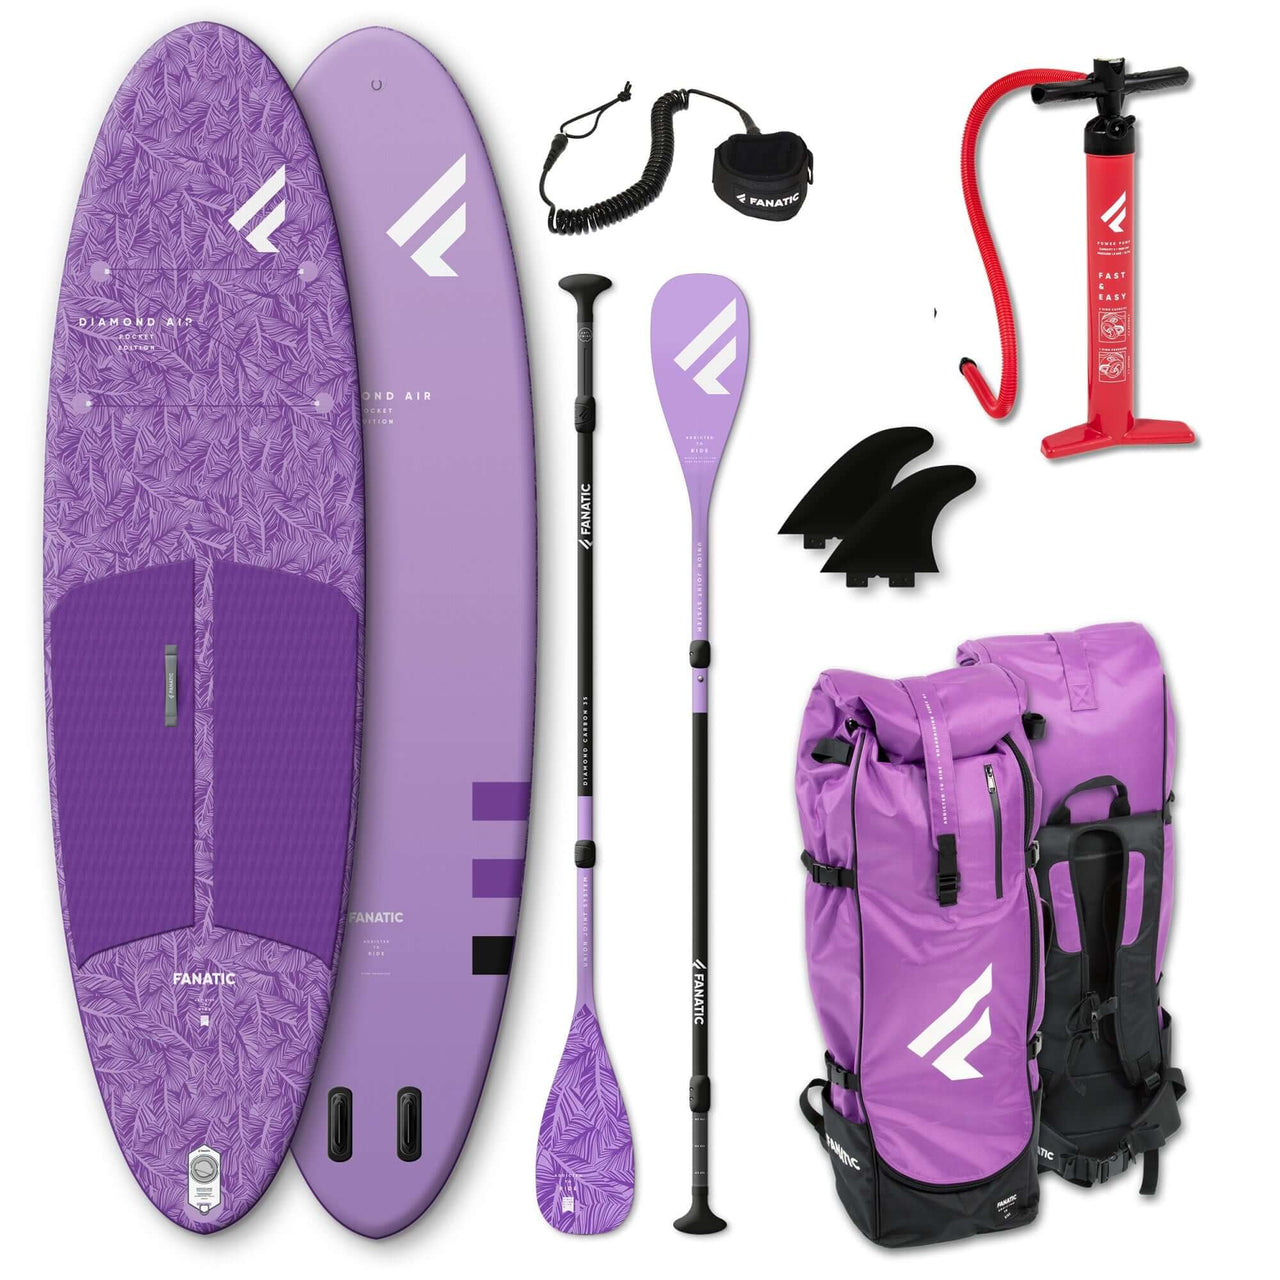 Fanatic iSUP Package Diamond Air Pocket – SUP Package